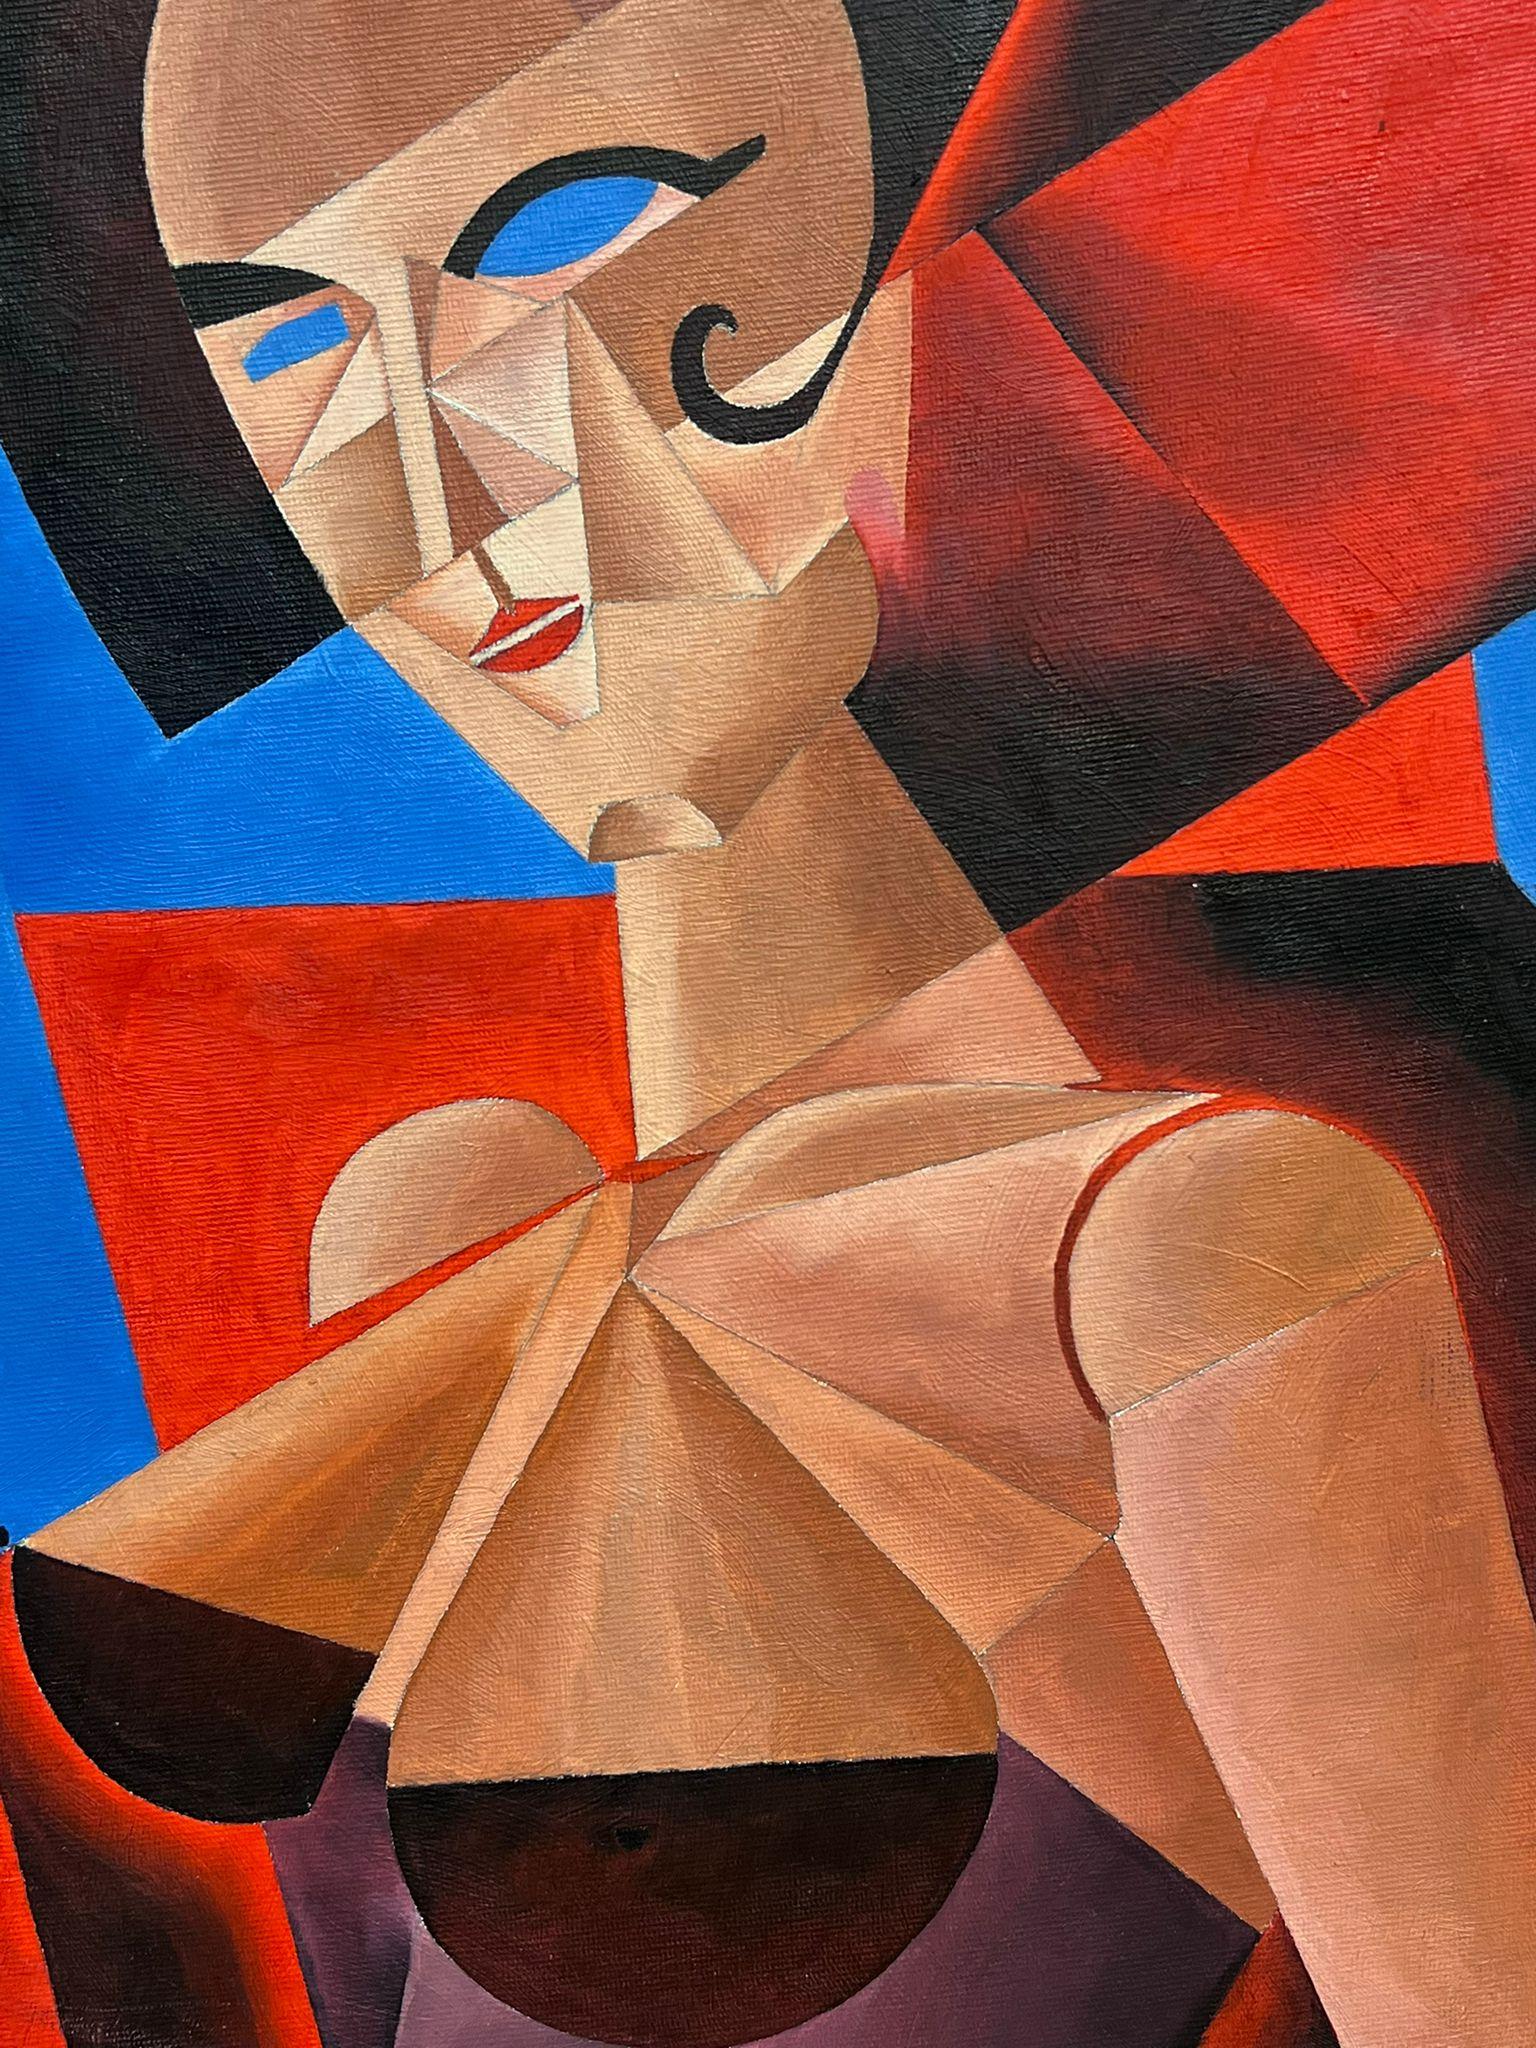 Abstract Cubist Signed Oil Painting Portrait of Woman Angular Shapes For Sale 3